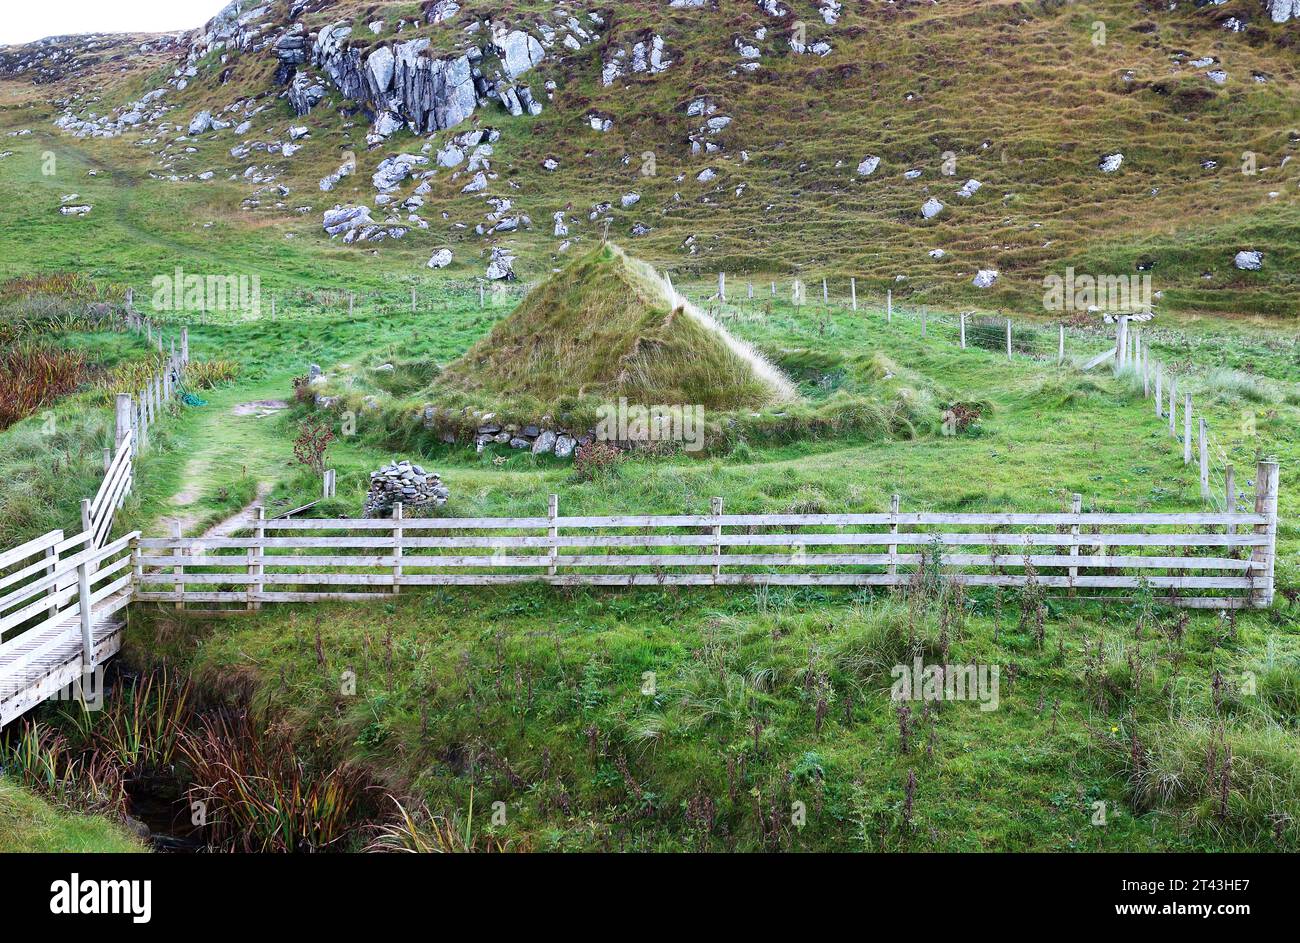 A view of a replica Iron Age house with design based on nearby Iron Age village remains by Bosta Beach, Great Bernera, Outer Hebrides, Scotland. Stock Photo